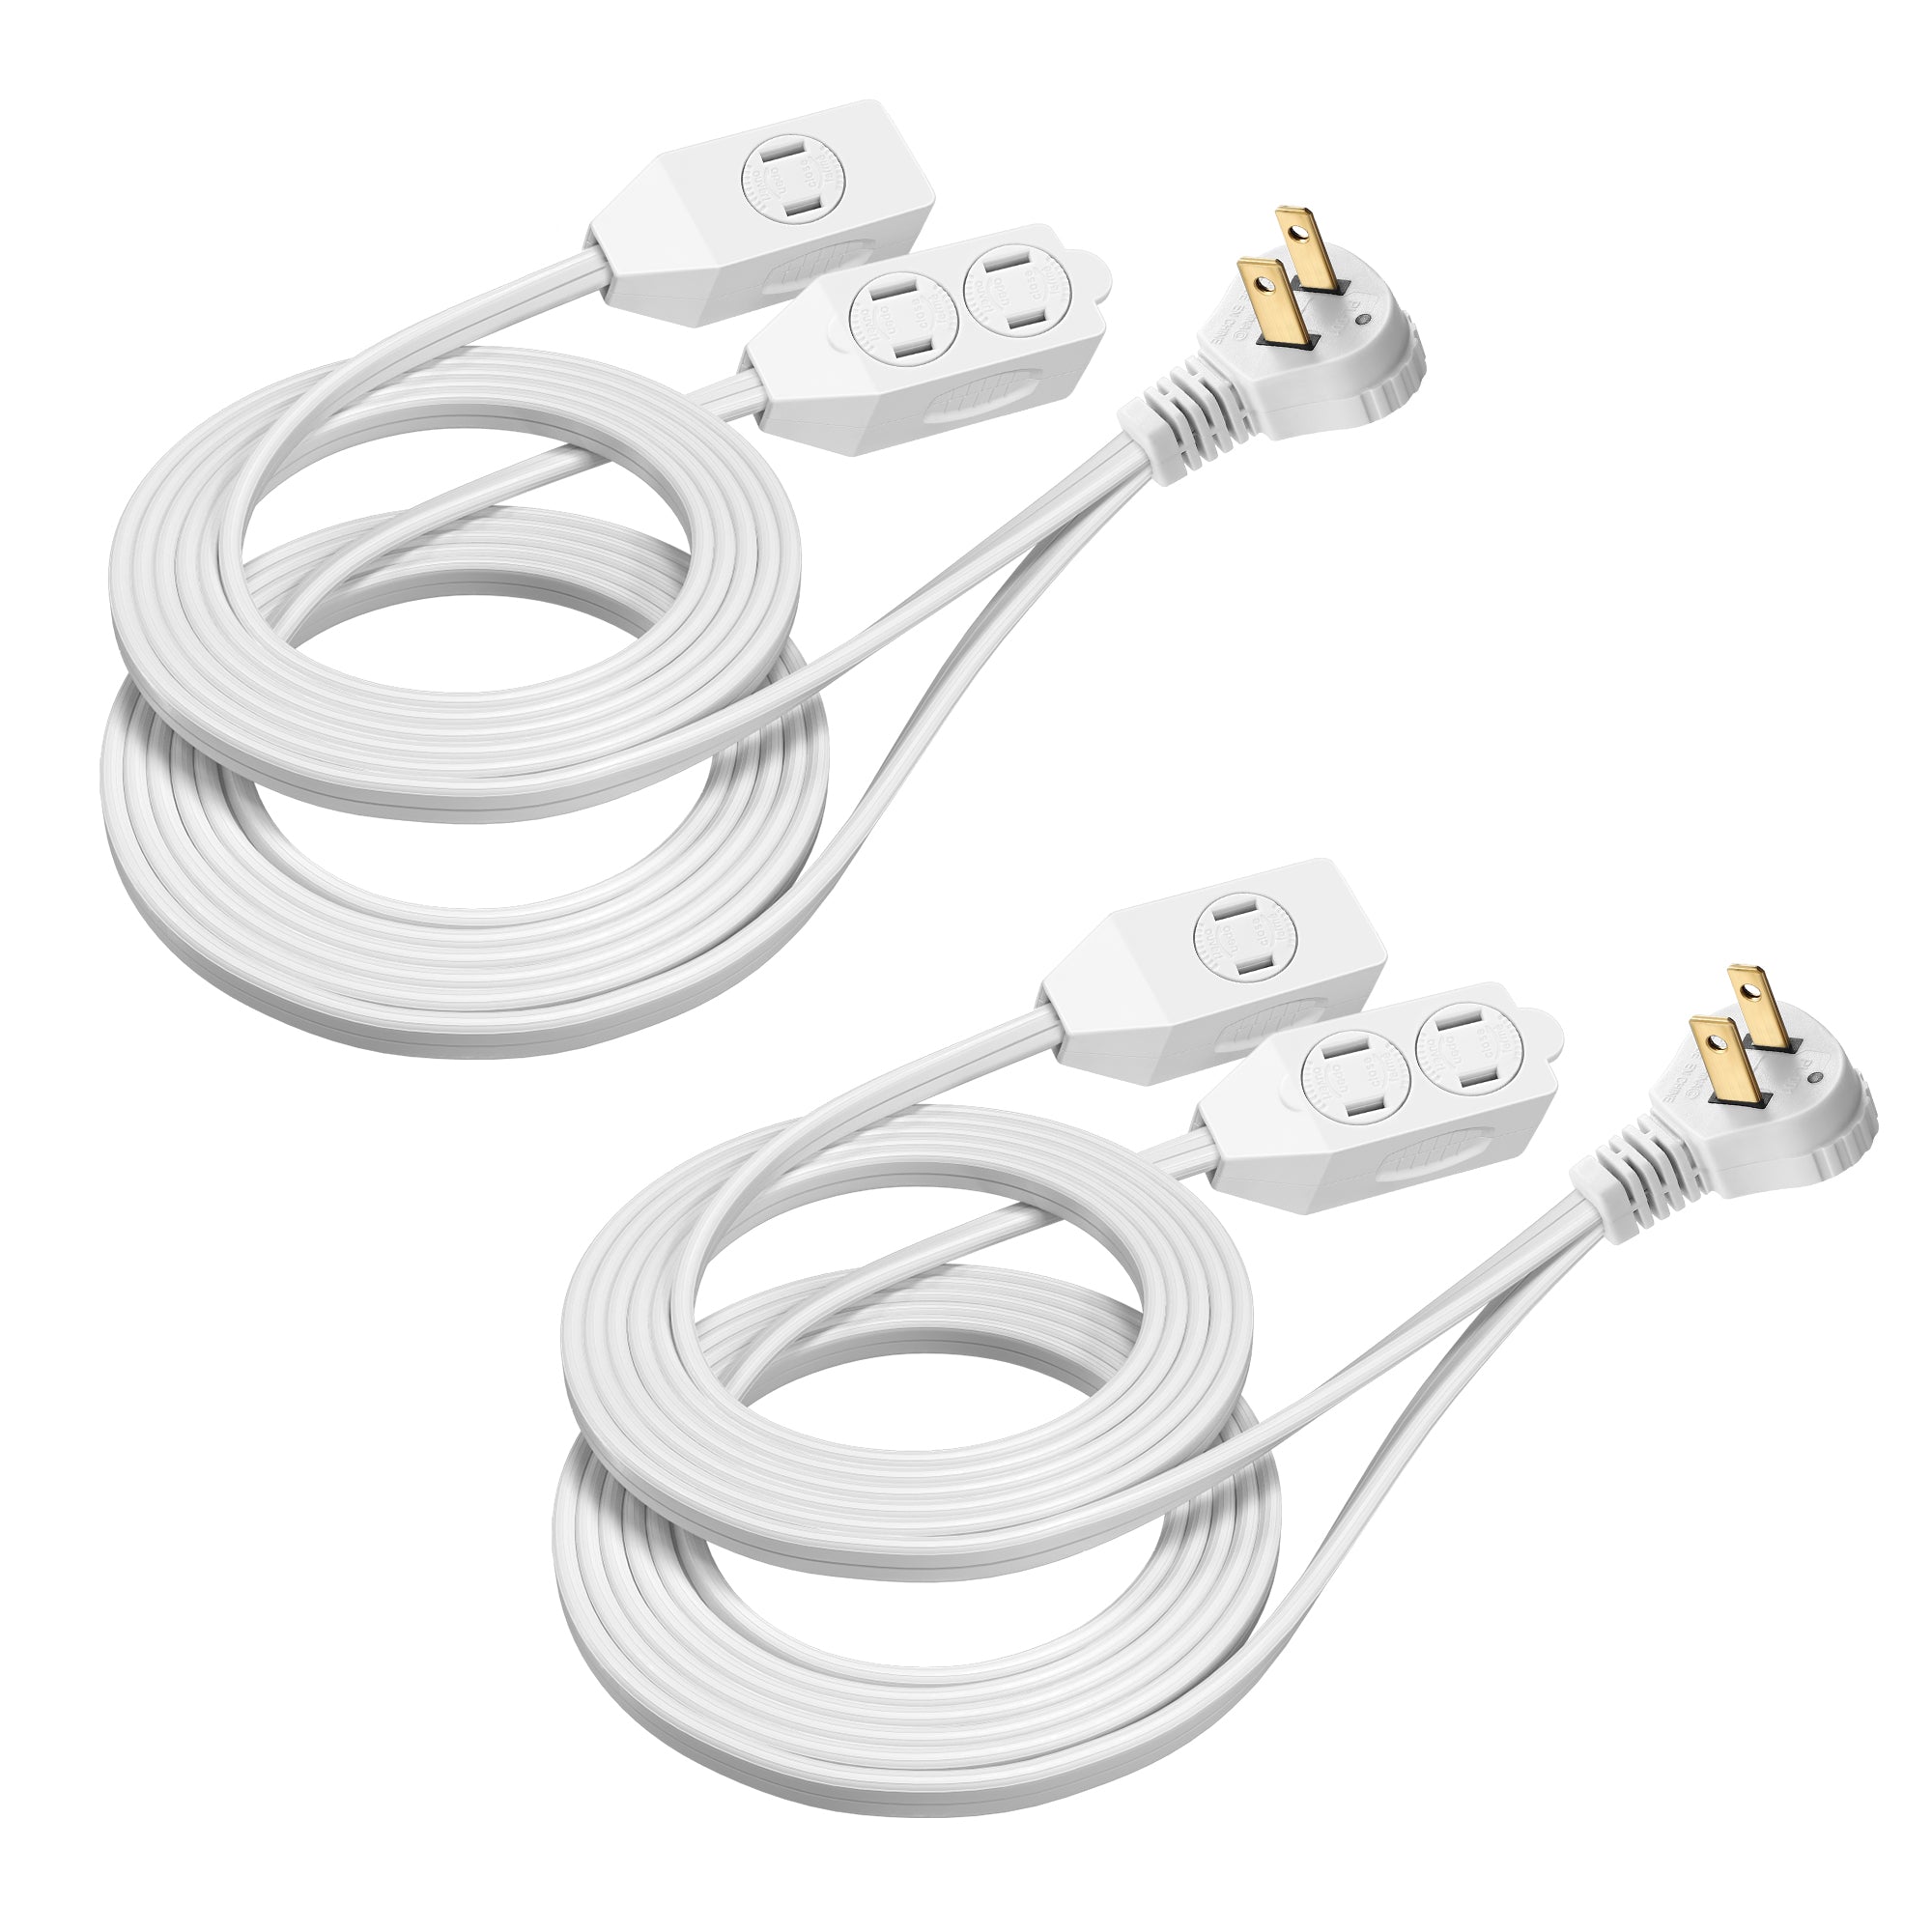 3-Prong Twin Extension Cord 12FT Double Cord 6 FT Each Side Slim Flat Head  Extension Cord Total 6 Outlets